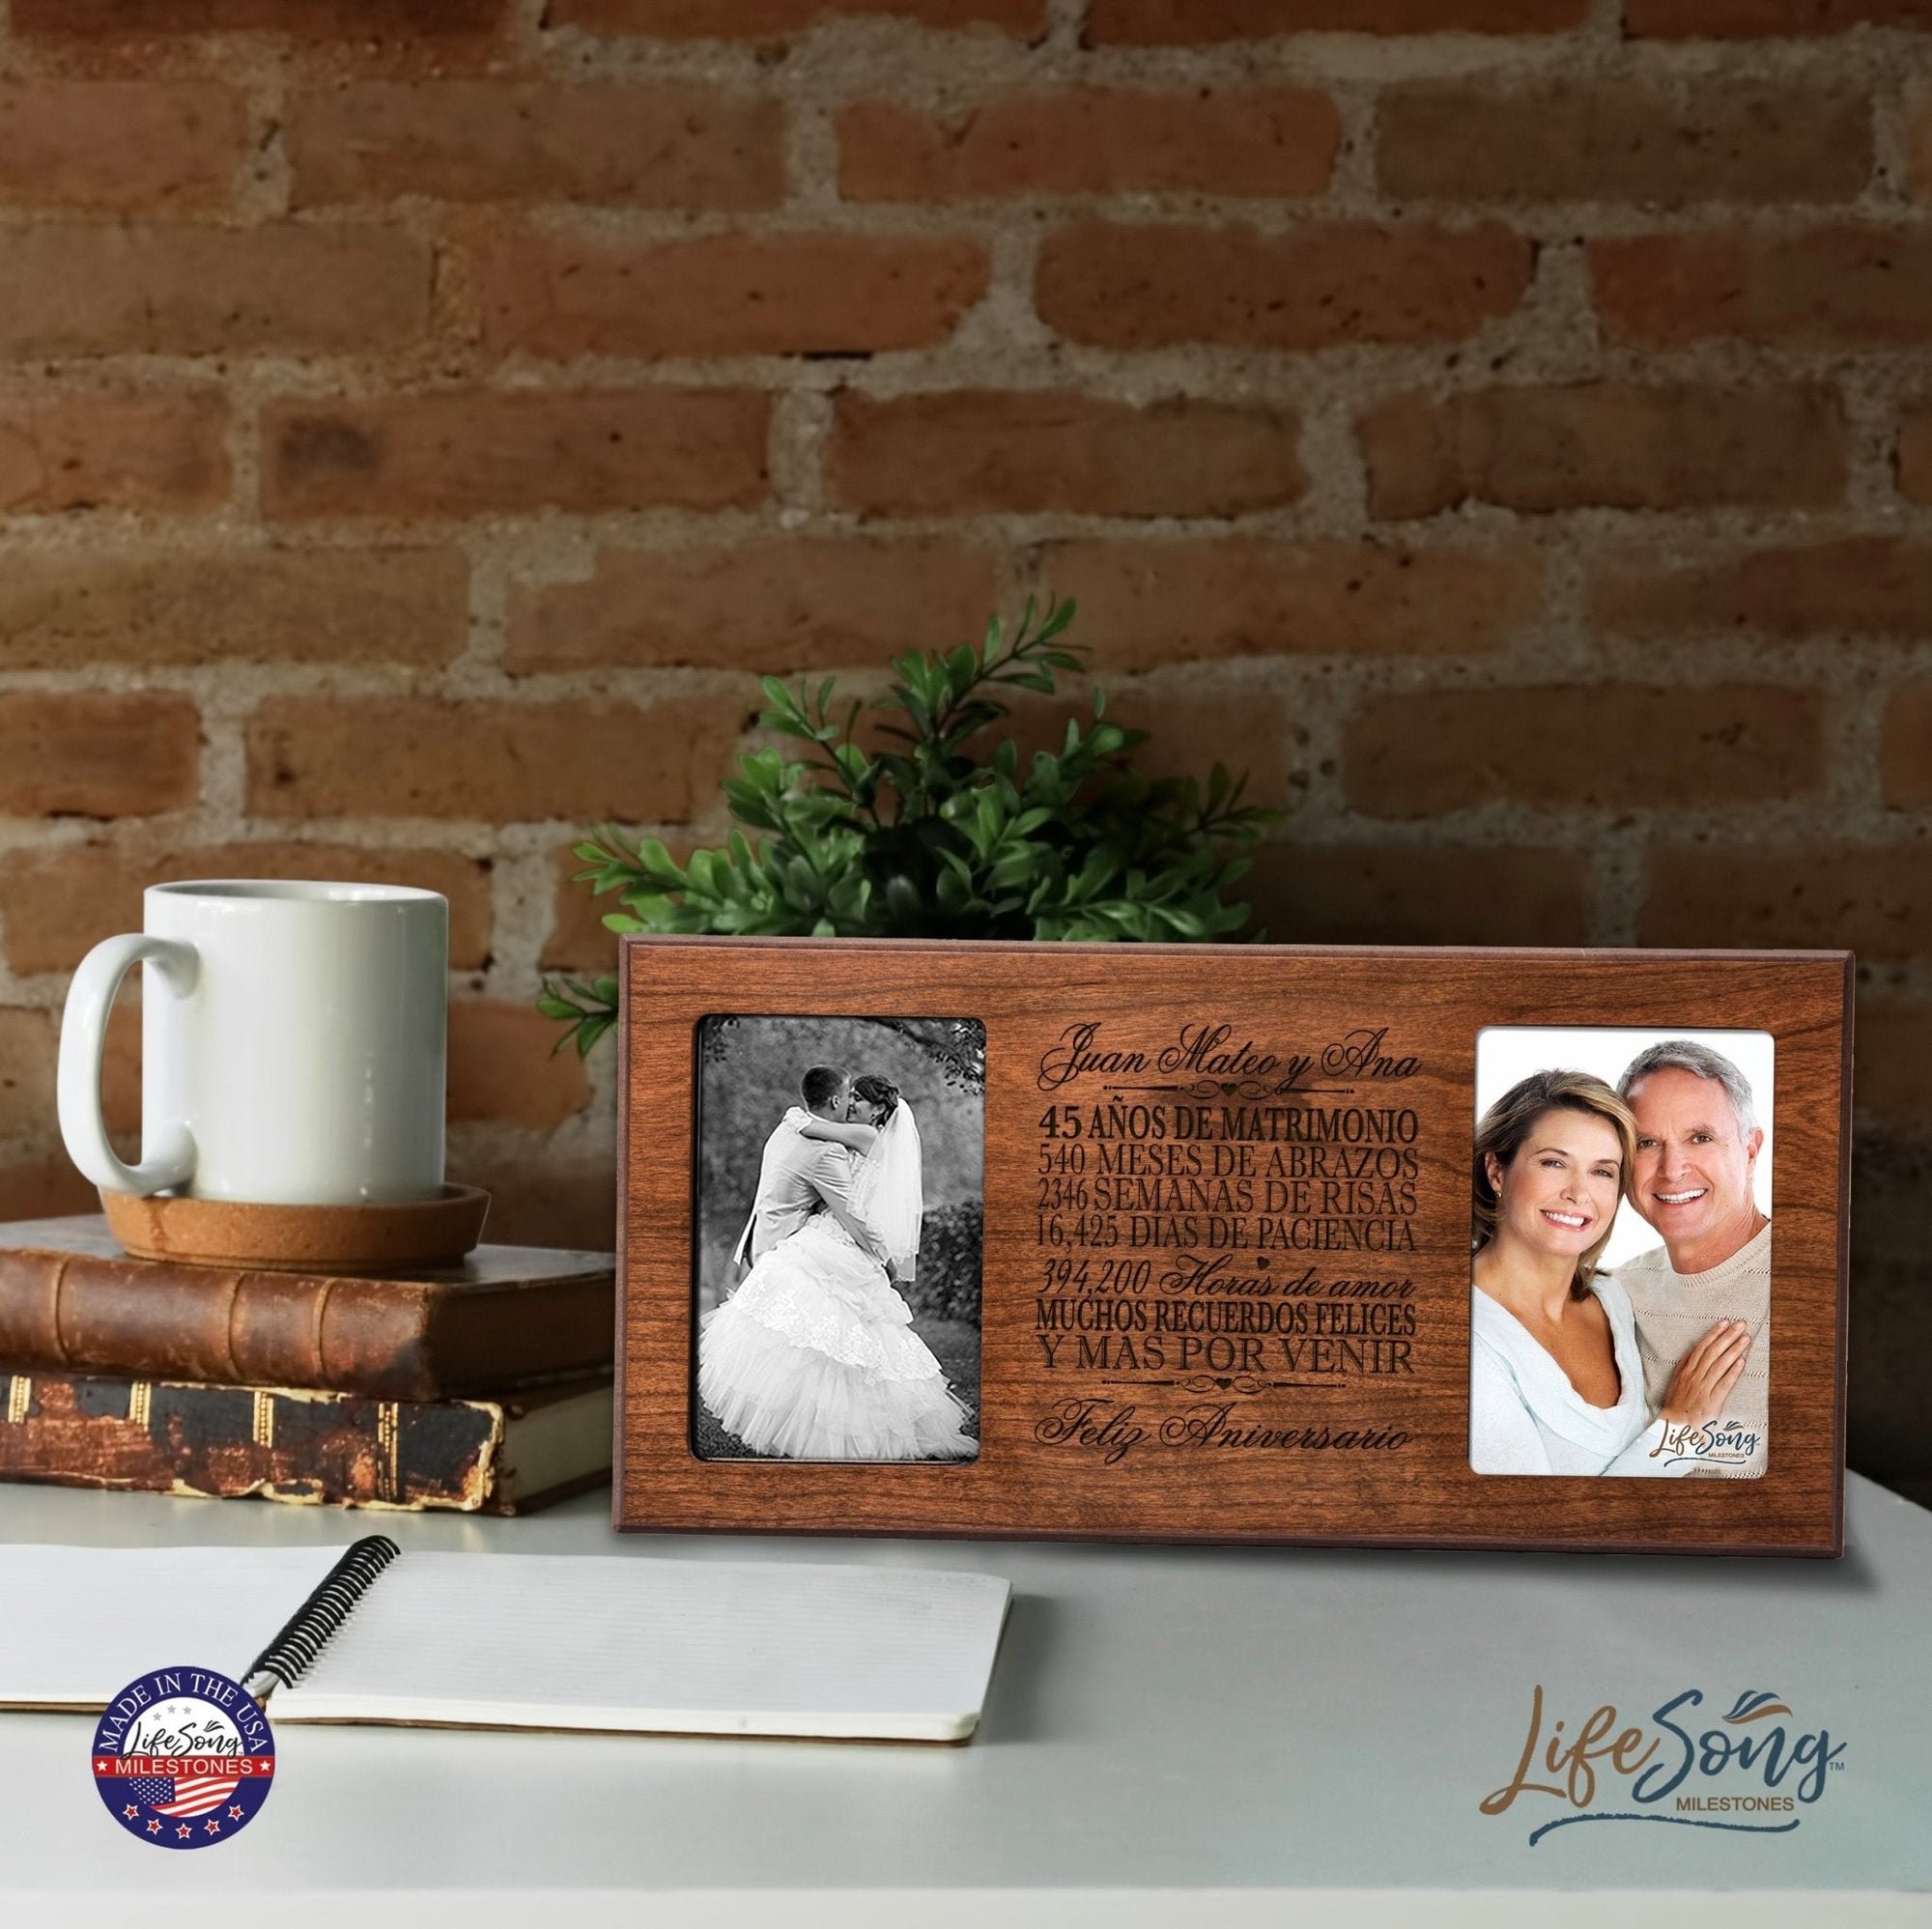 Personalized 45th Anniversary Picture Frame Holds 2-4x6 Photos (Spanish Verse) - LifeSong Milestones